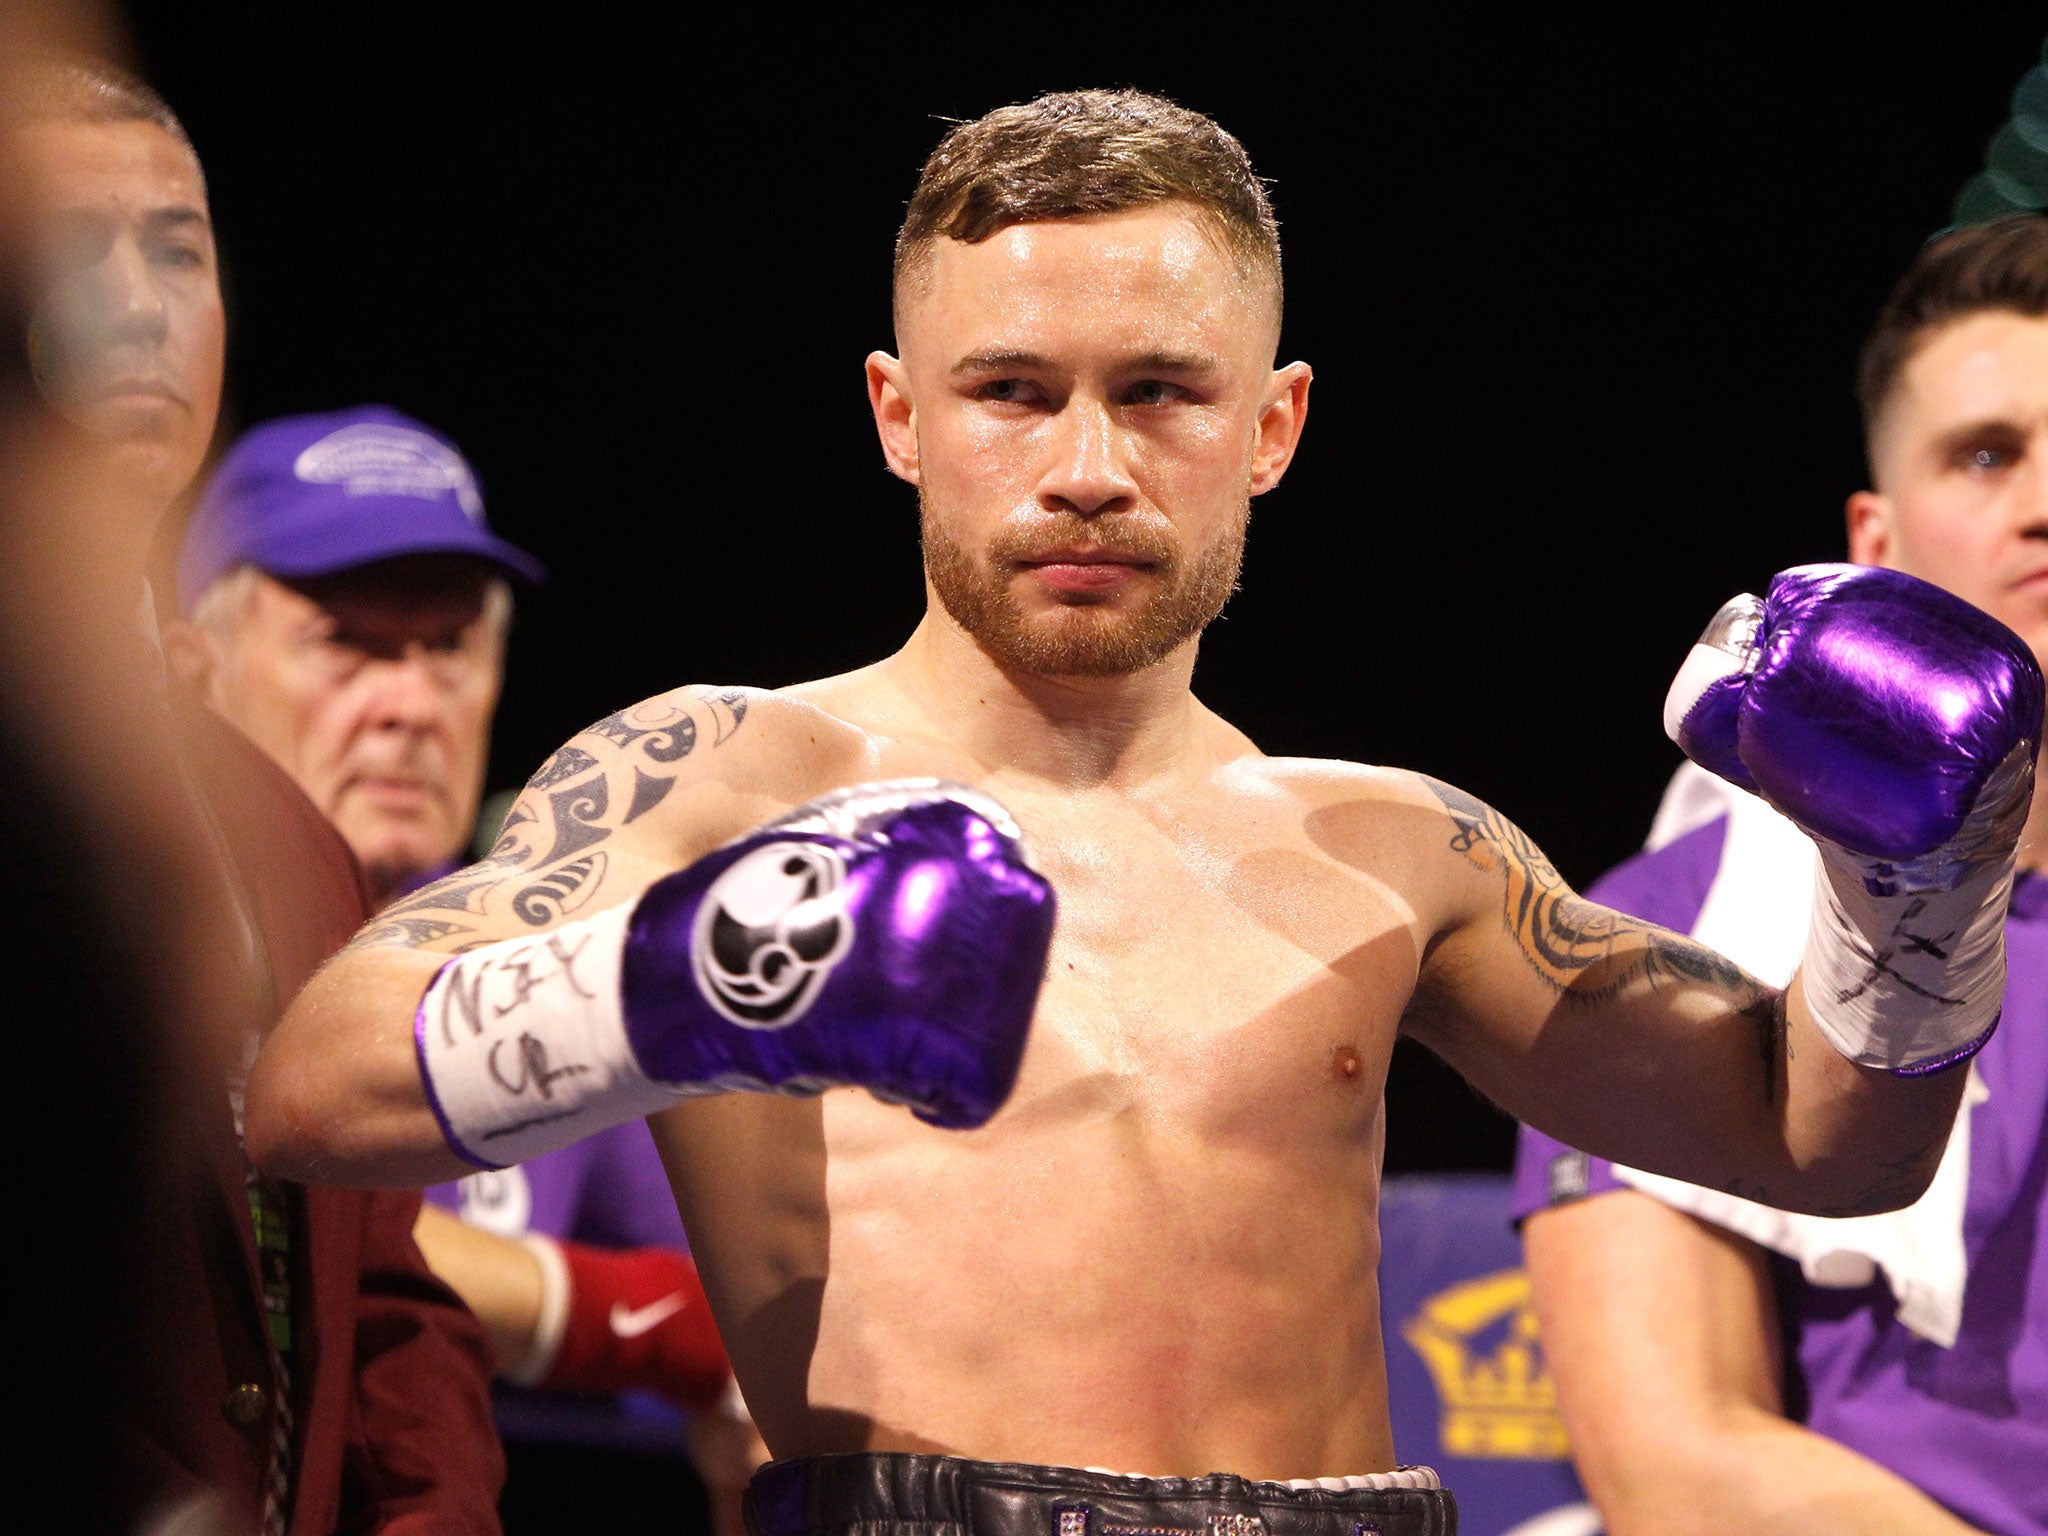 &#13;
Frampton thinks the fight is good for boxing &#13;